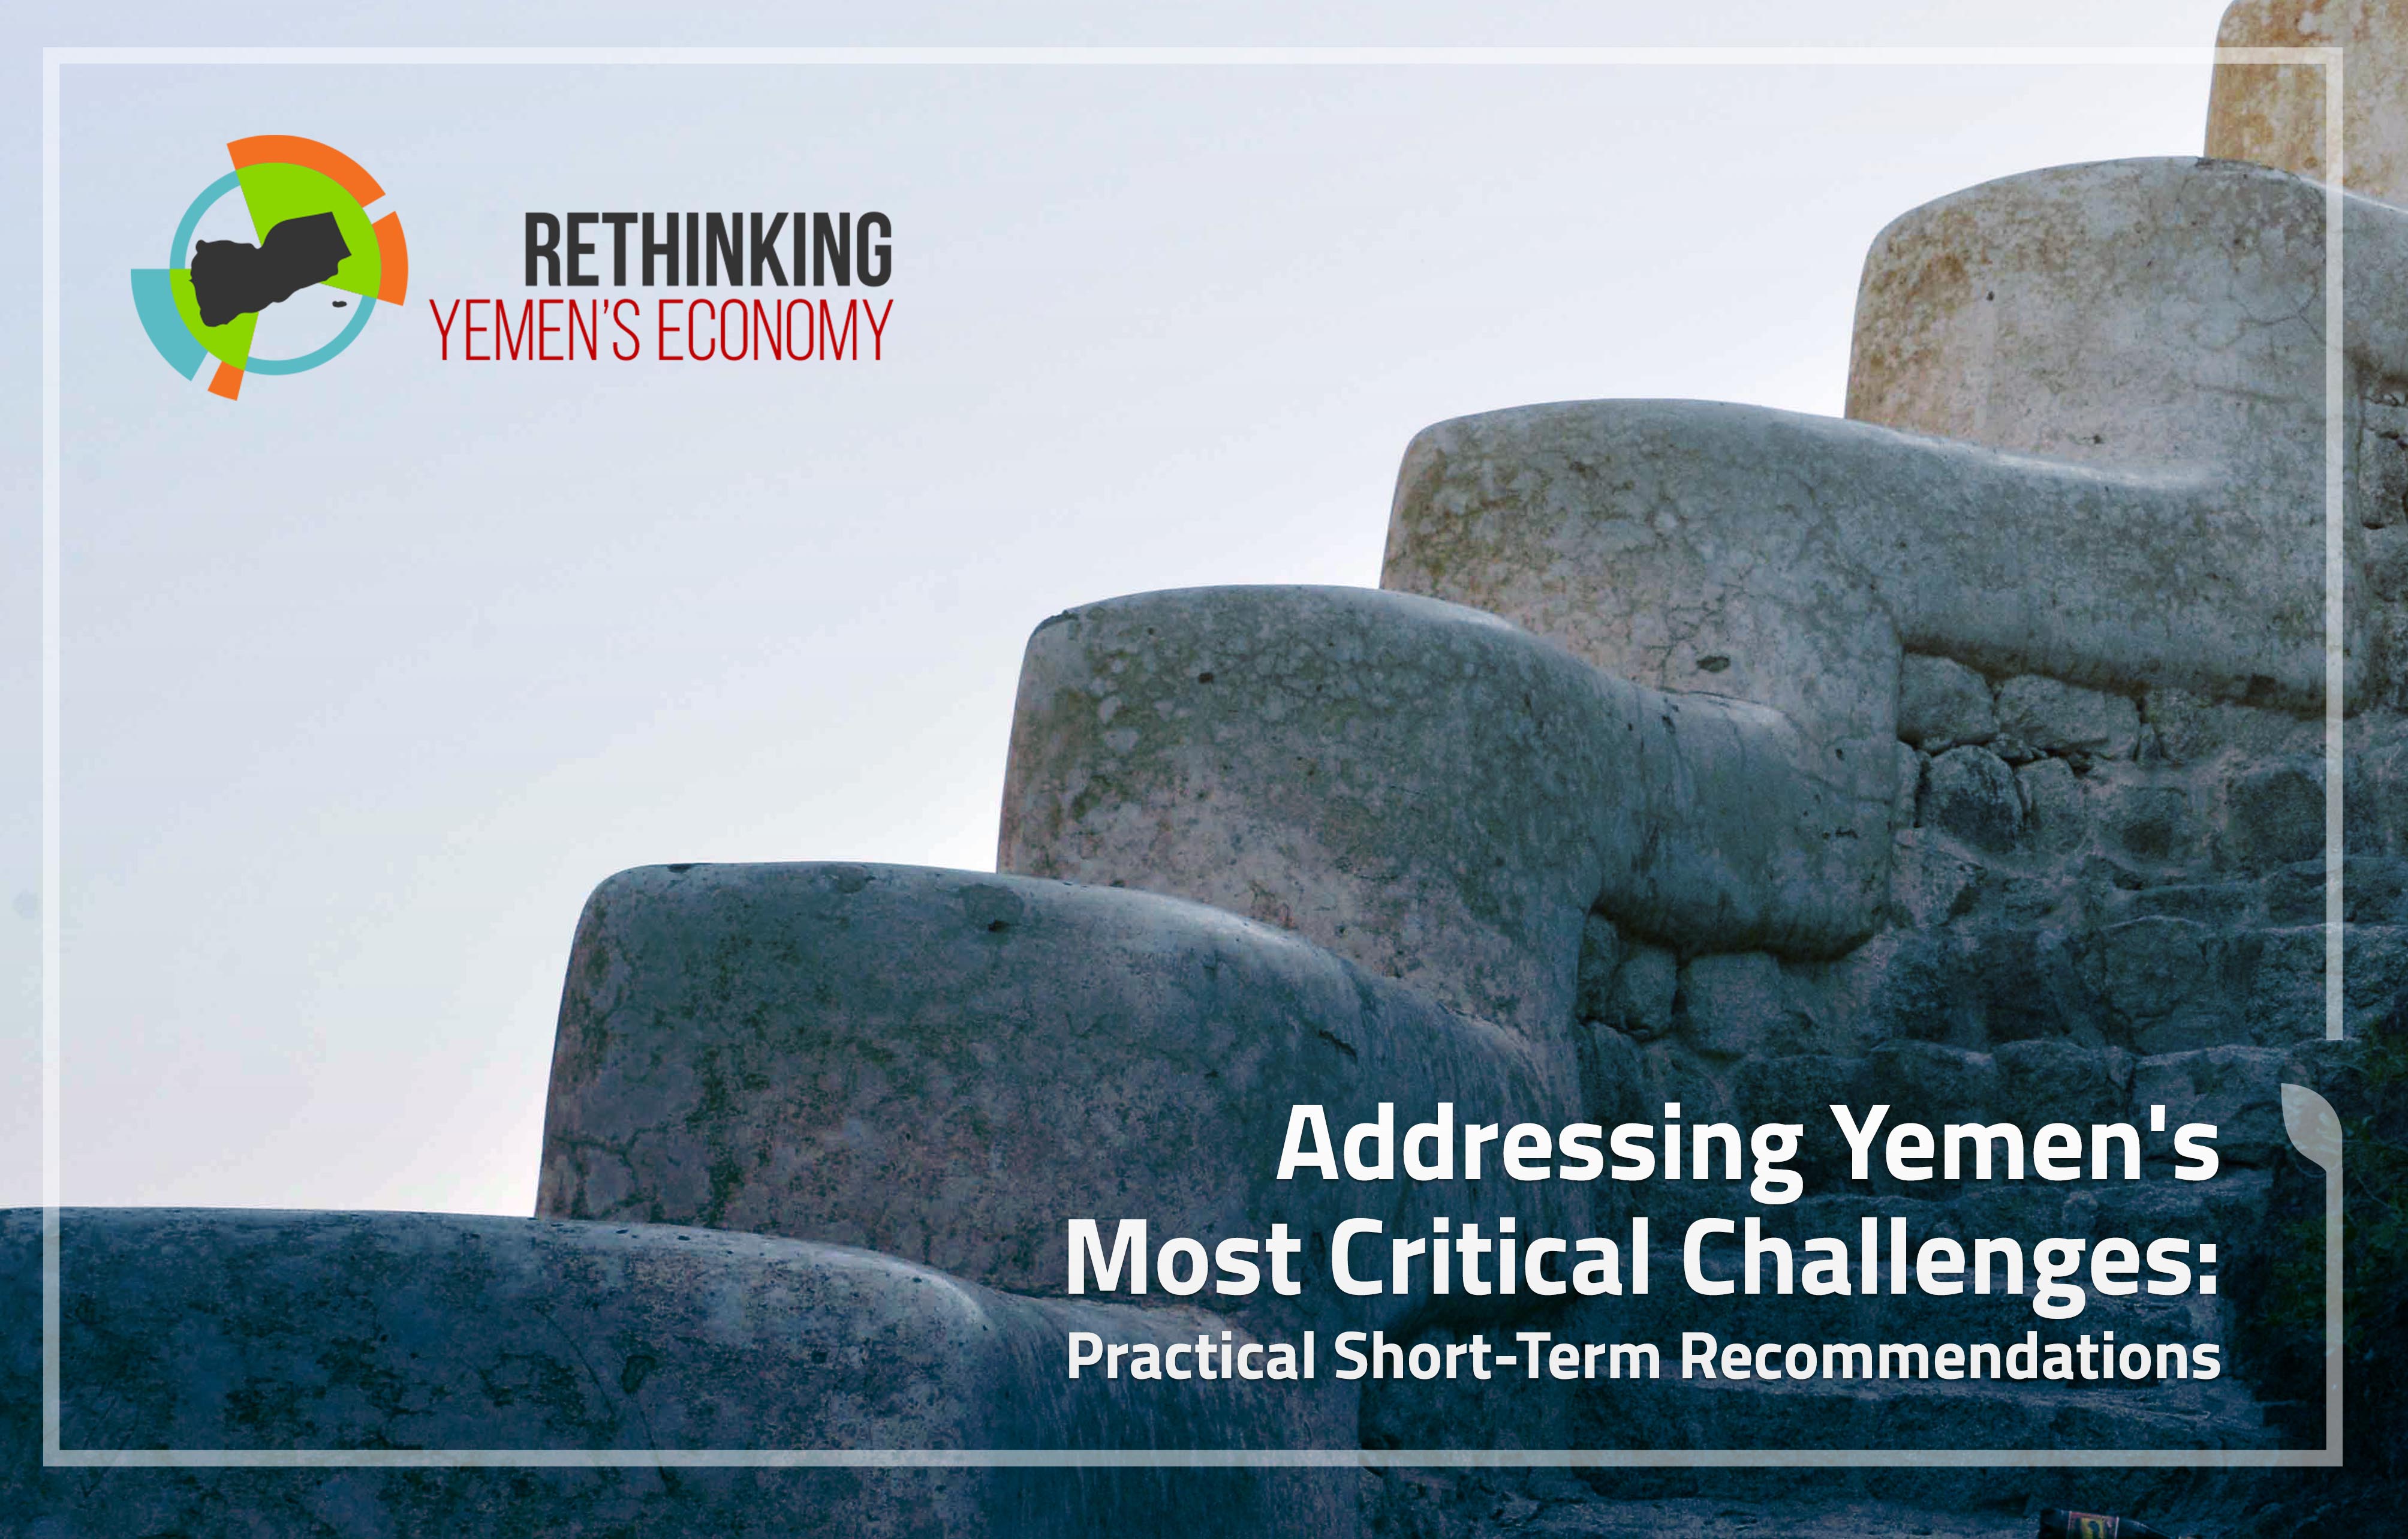 Addressing Yemen's Most Critical Challenges: Practical Short-Term Recommendations